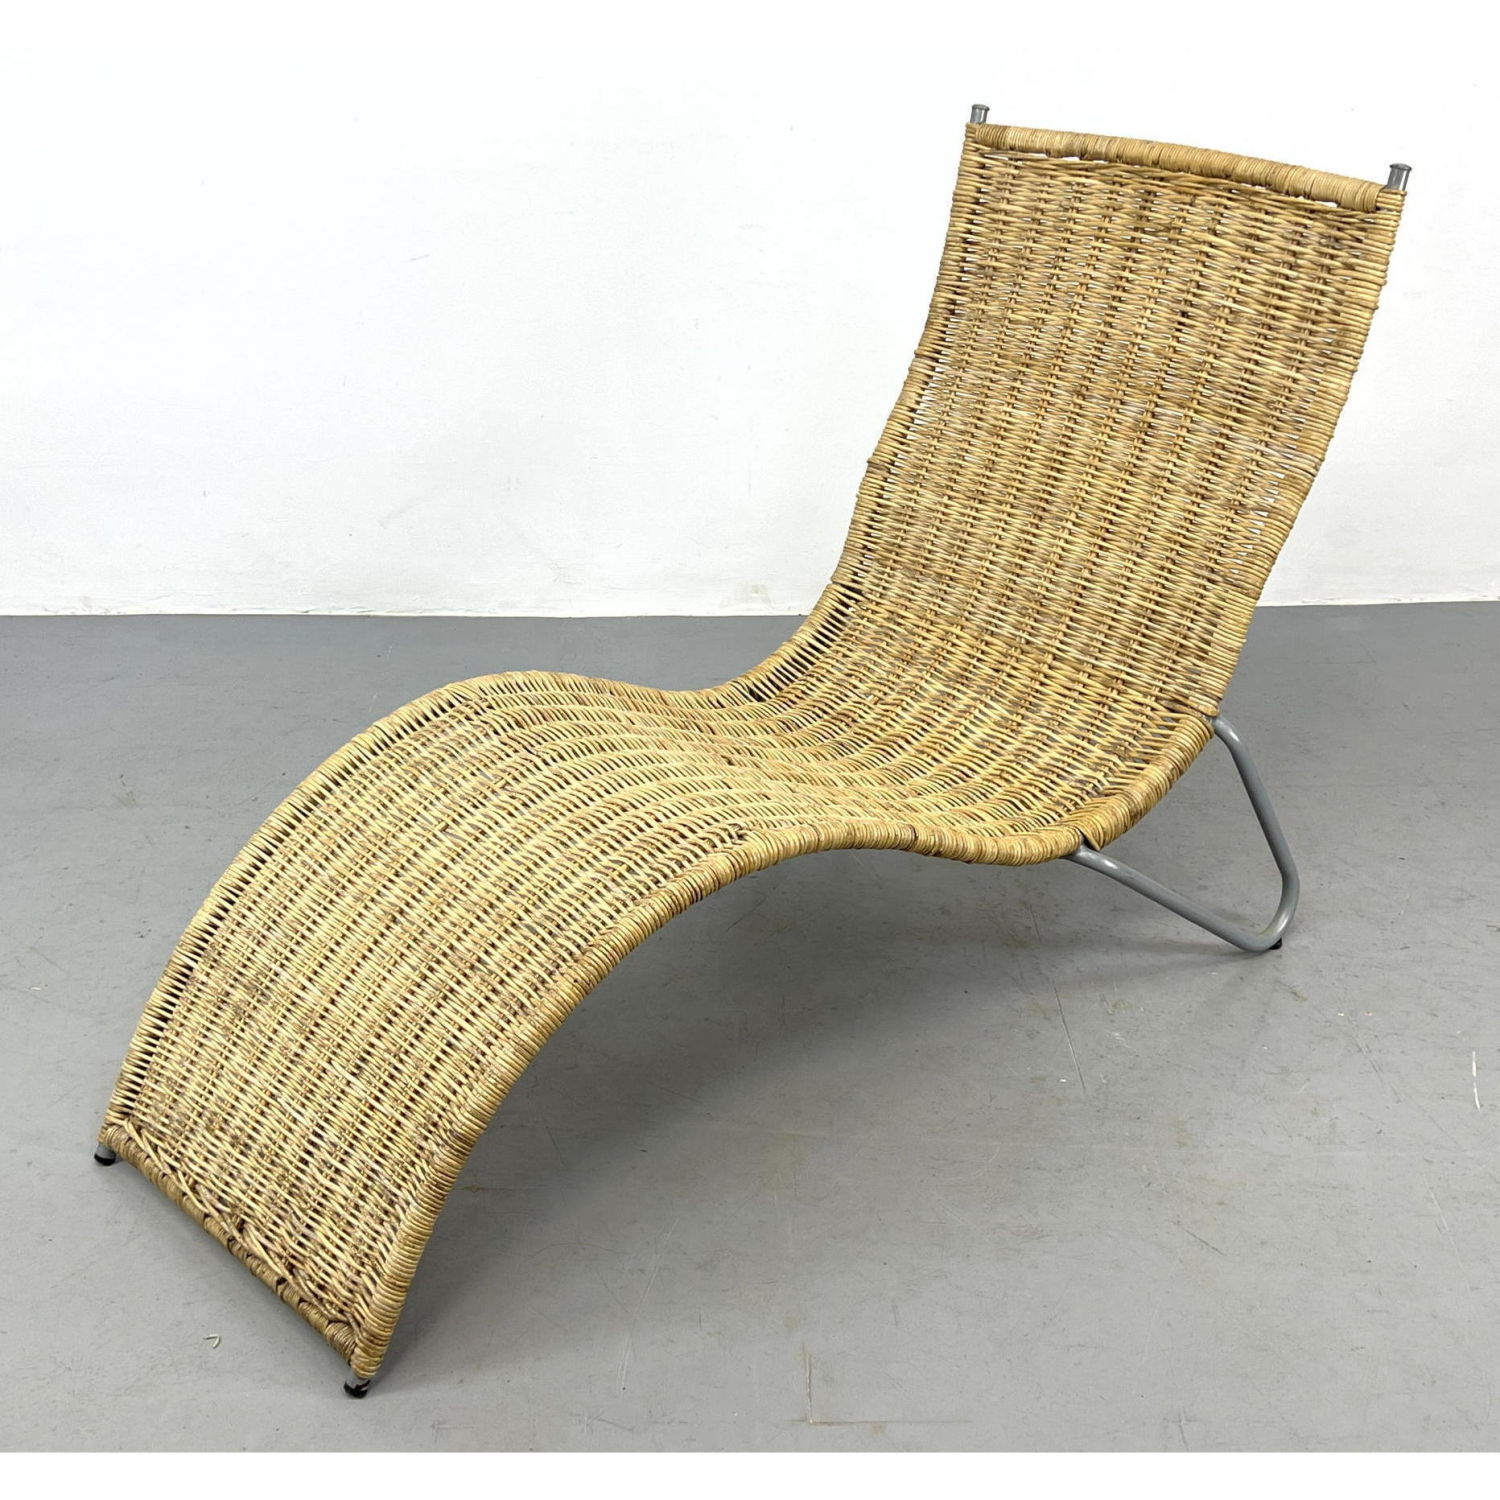 Woven Rattan Curved Wave Chaise 2fe7e5